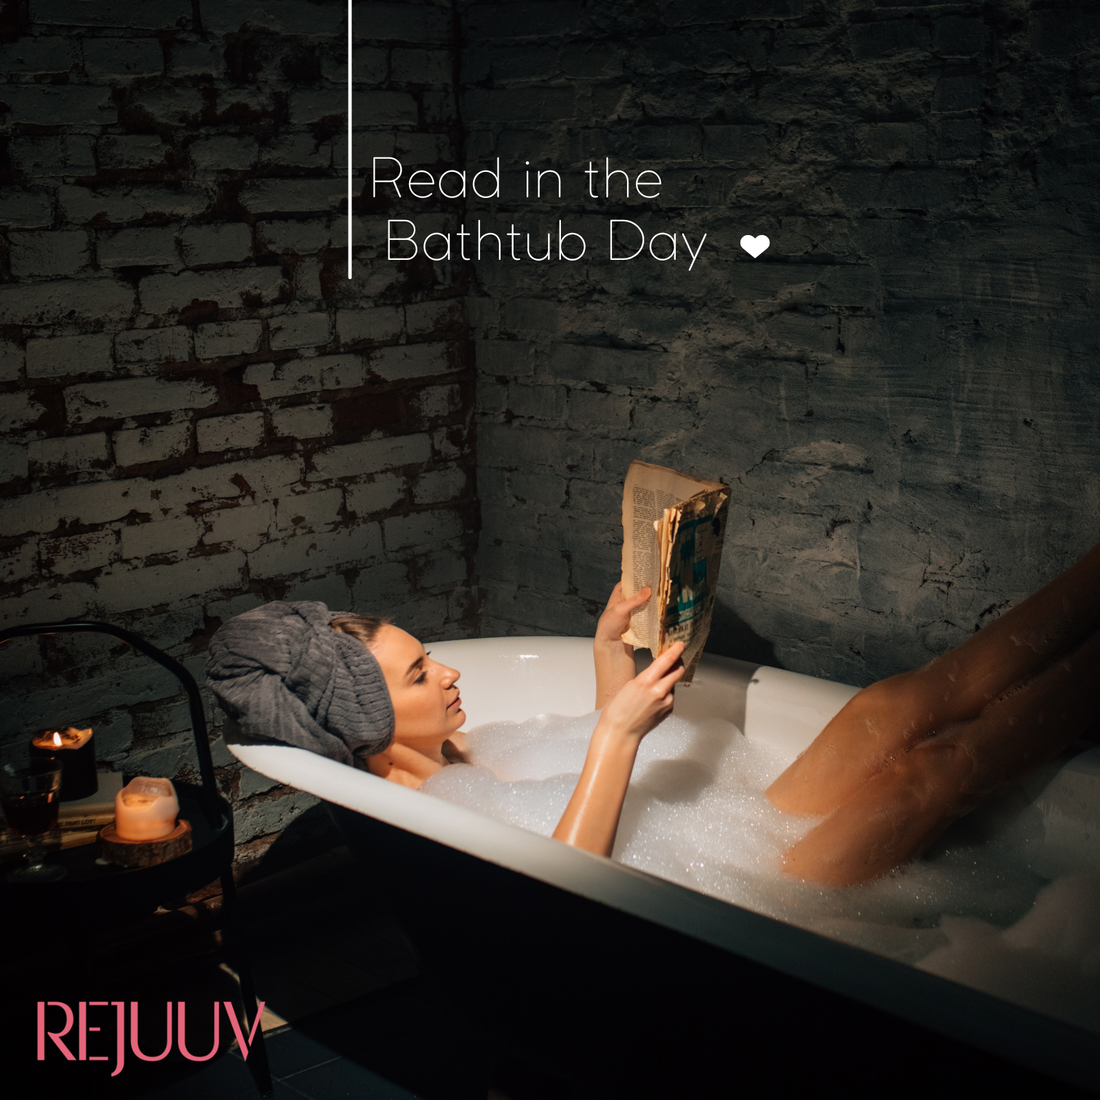 Celebrate Read in the Bathtub Day with a Good Book